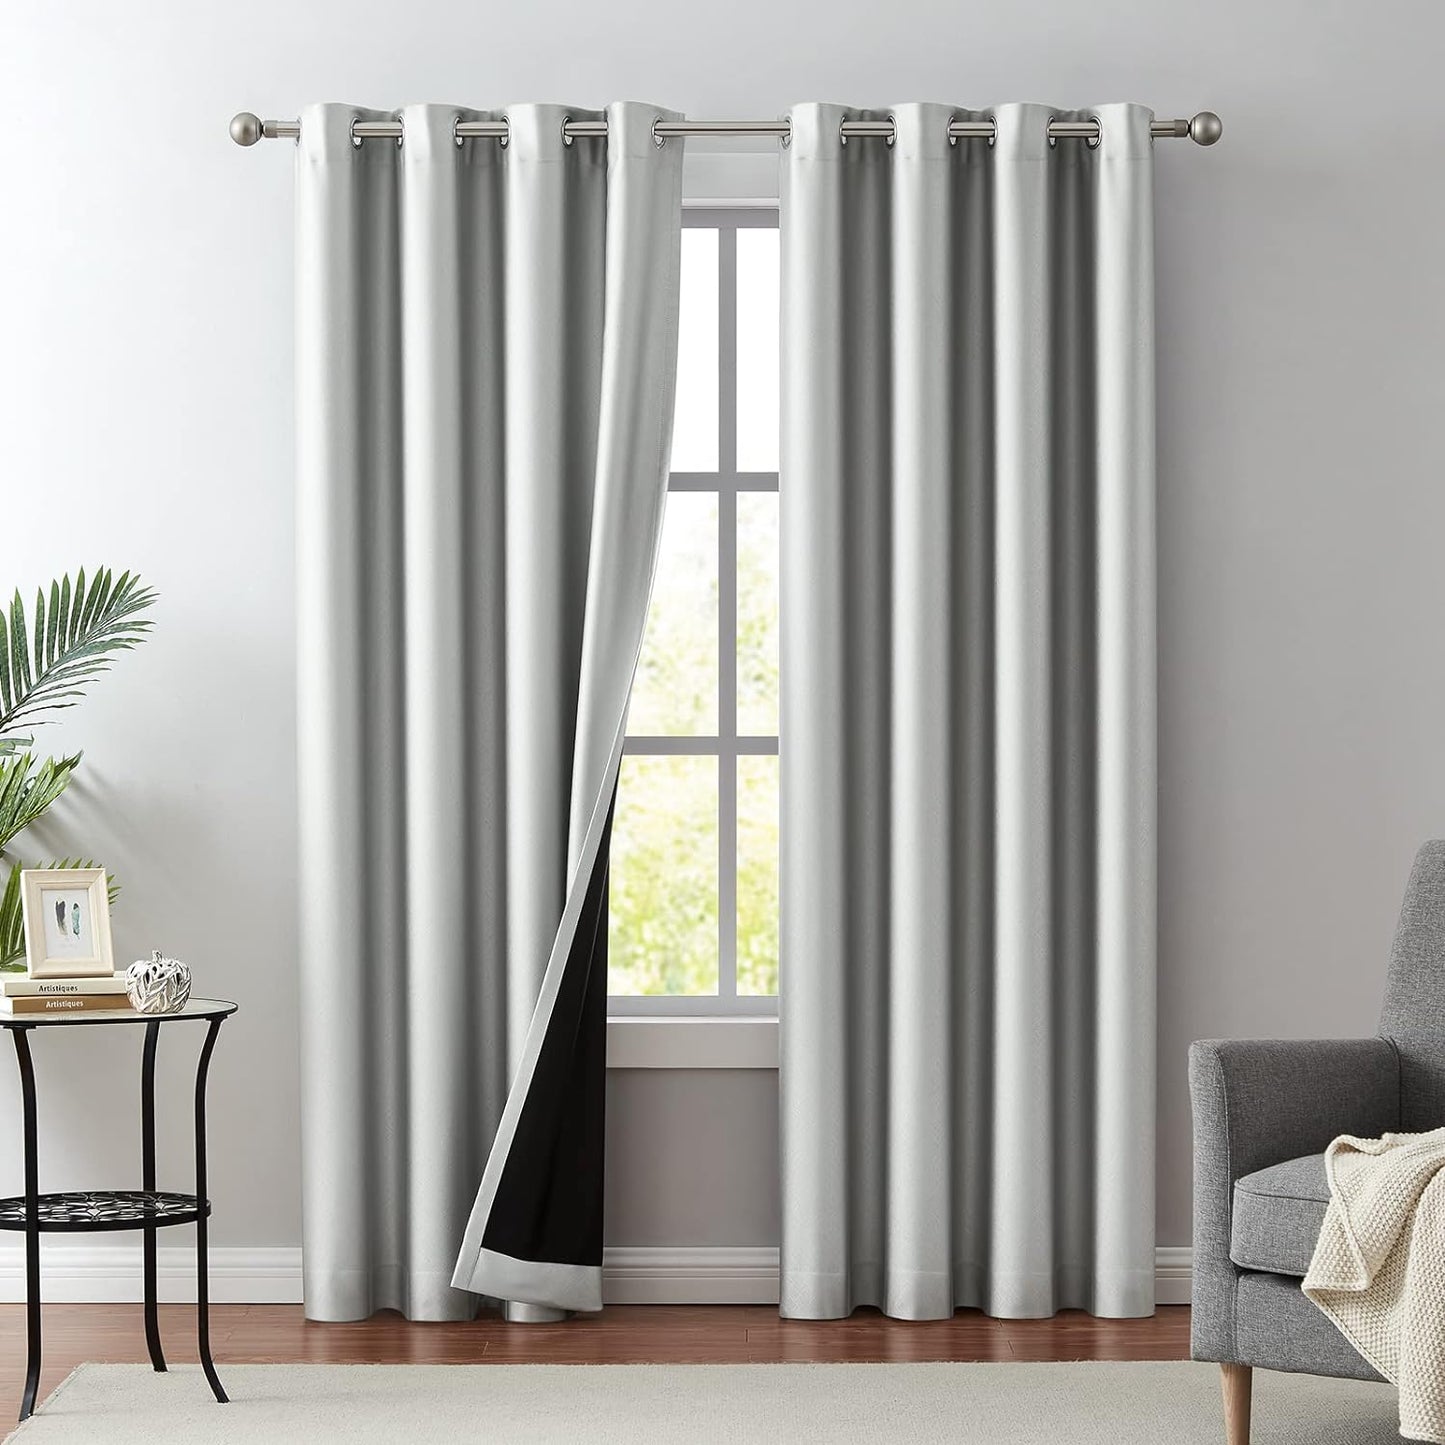 Melodieux Pink Blackout Curtains 84 Inches Long for Bedroom, Thermal Insulated Energy Saving Grommet Embossed Satin Drapes with Black Lining, 52 by 84 Inch, 2 Panels  Melodieux Silver Grey 52"W X 84"L 